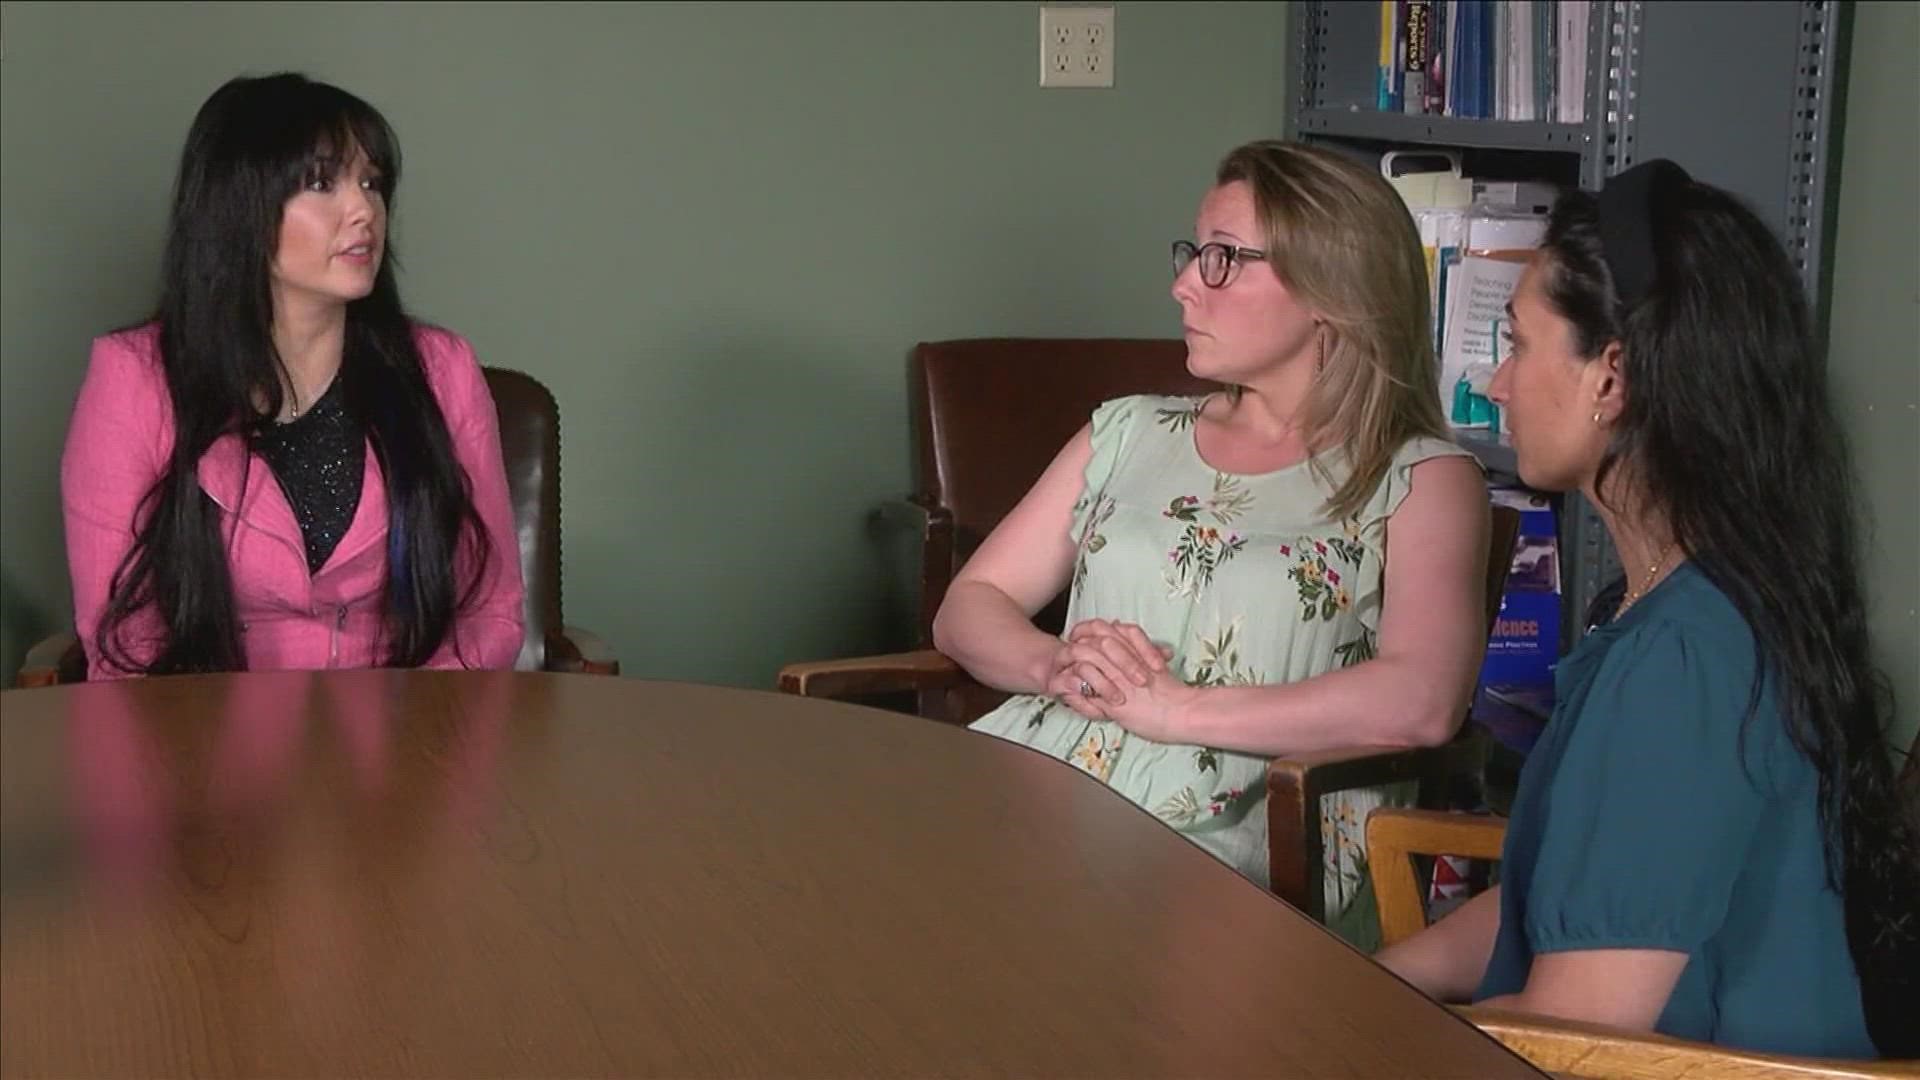 ABC24 brought two mothers together with a Memphis area psychologist to answer questions on how to put their children at ease.